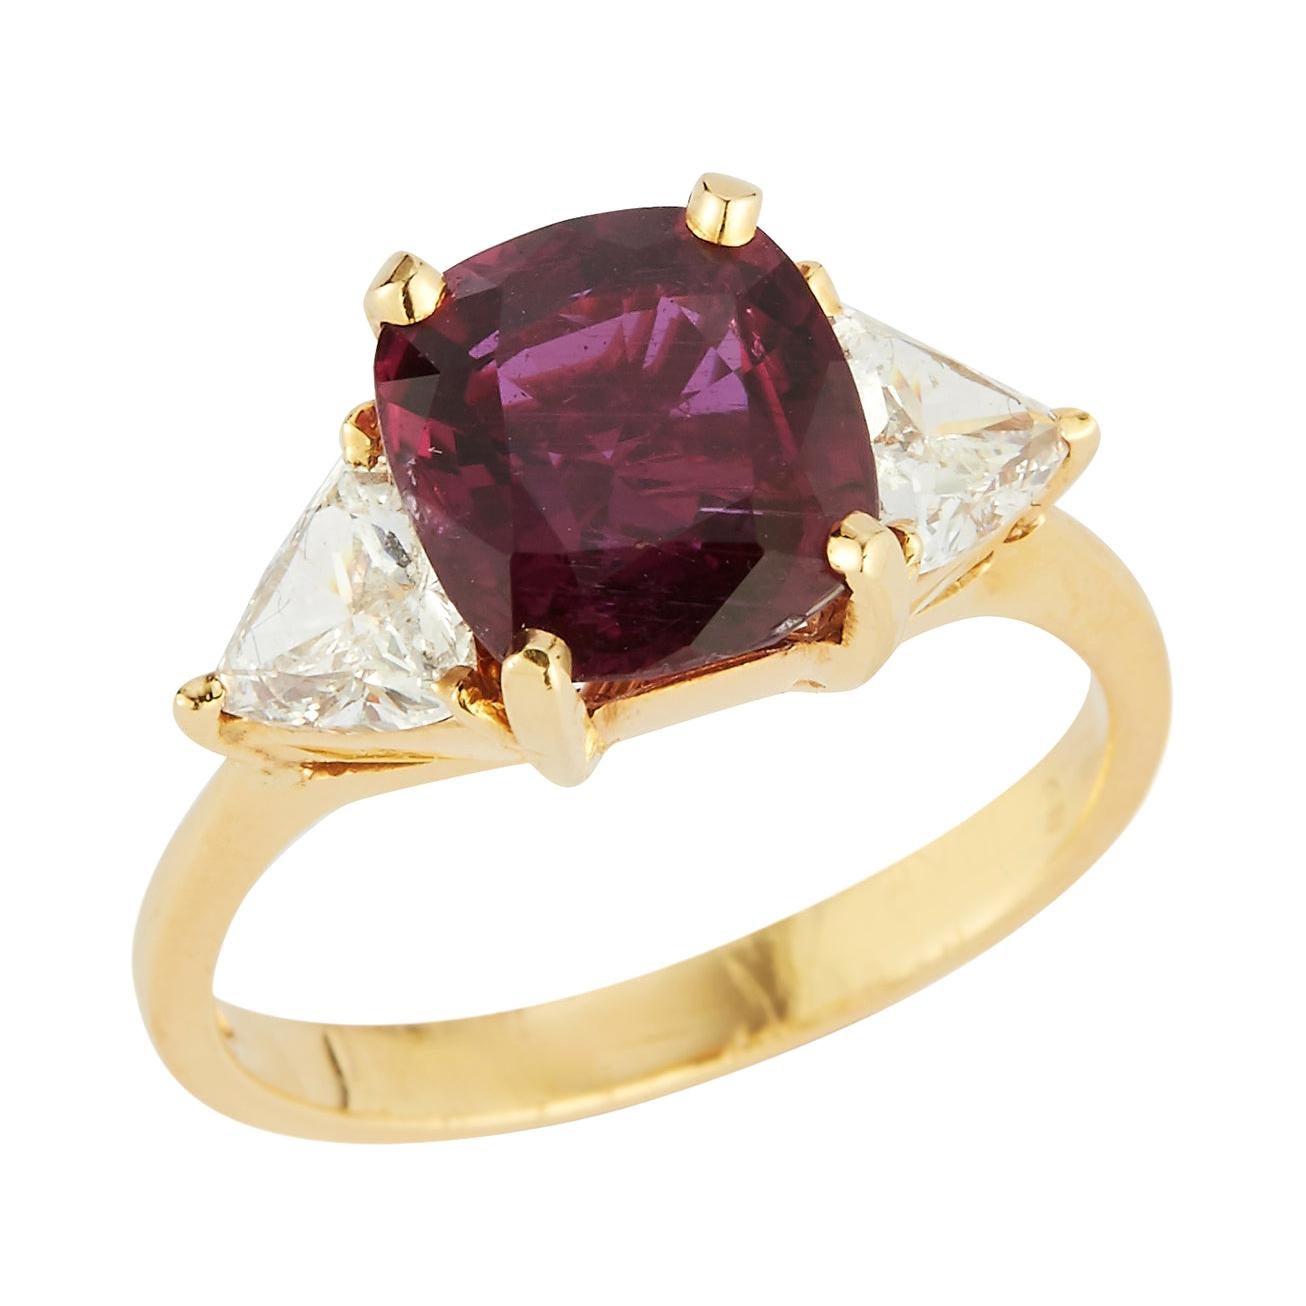 What does a ruby ring symbolize?